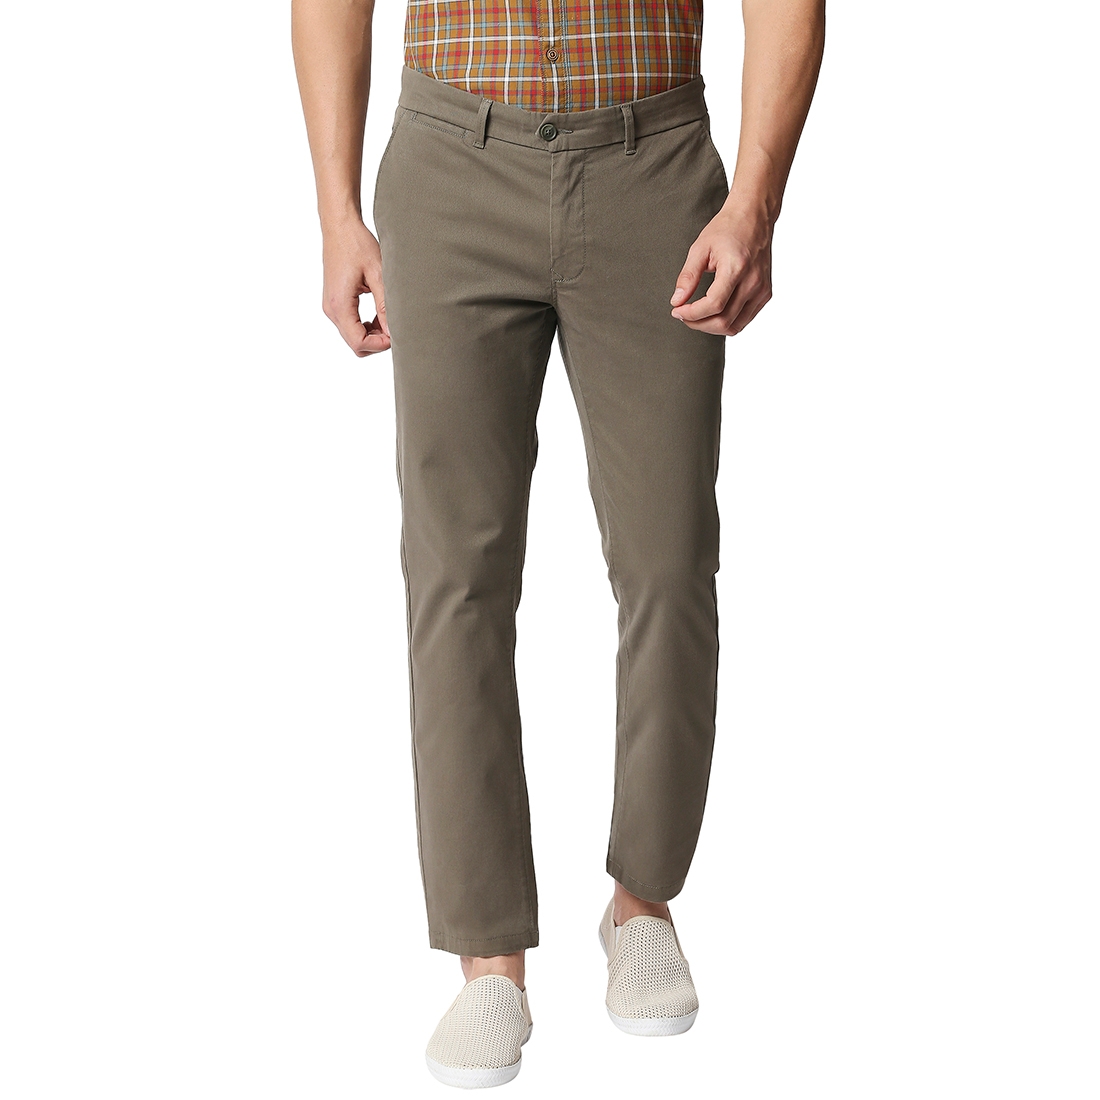 Basics | BASICS CASUAL PLAIN OLIVE COTTON STRETCH TAPERED TROUSERS 